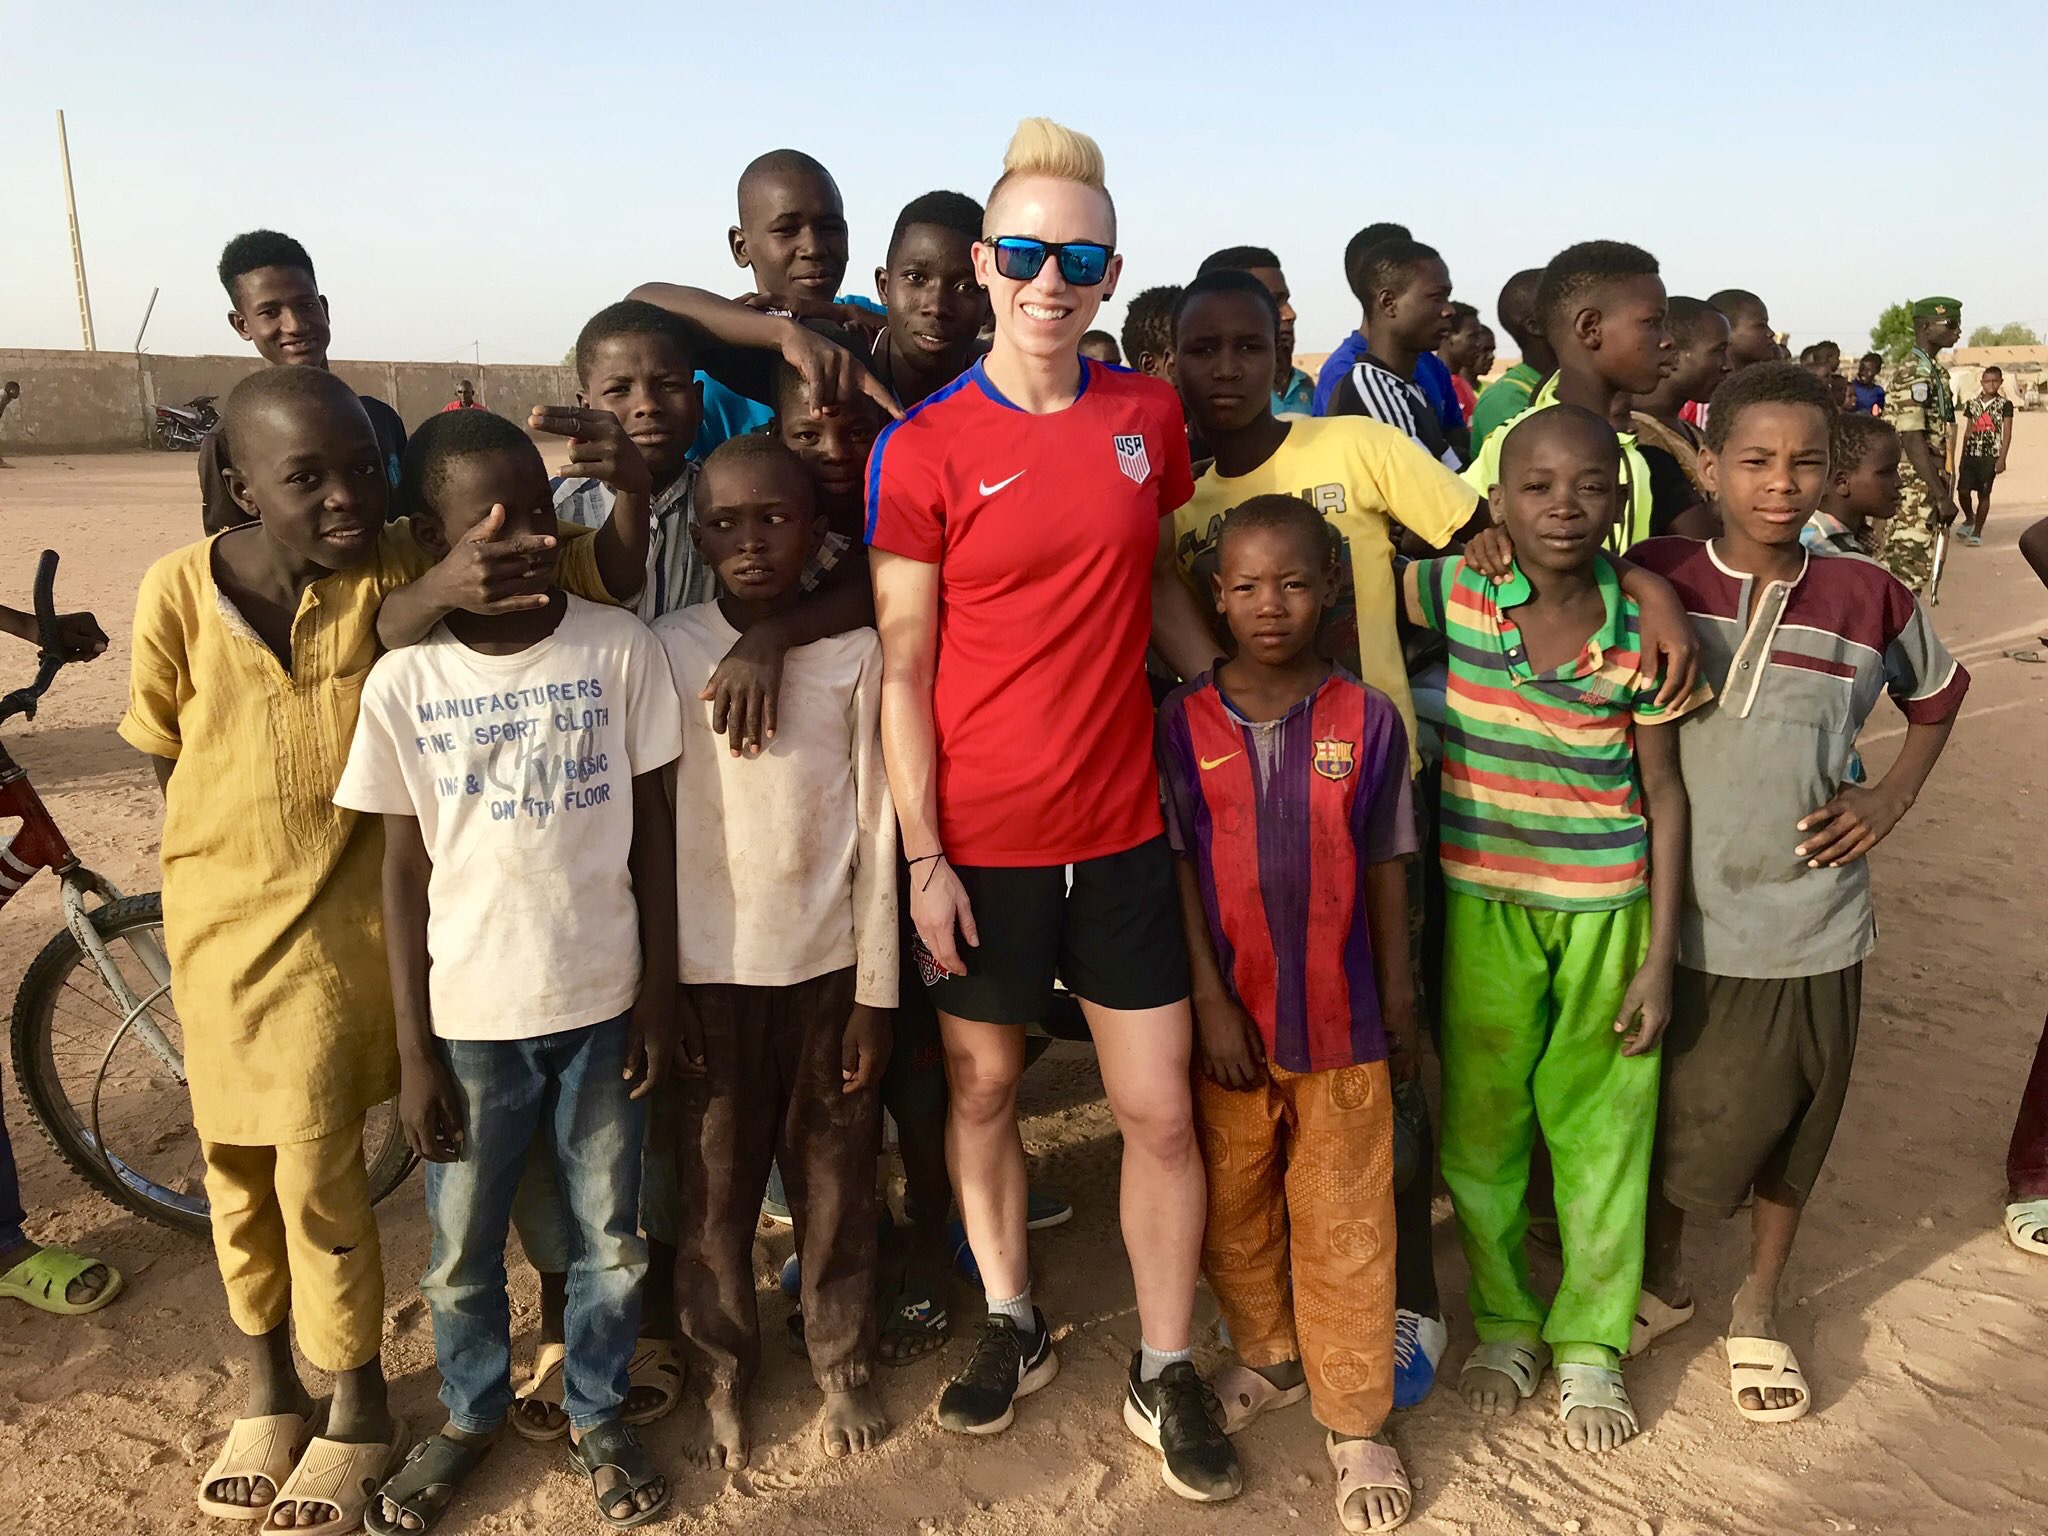 2018 soccer program in Niger with Staci Wilson and Joanna Lohman